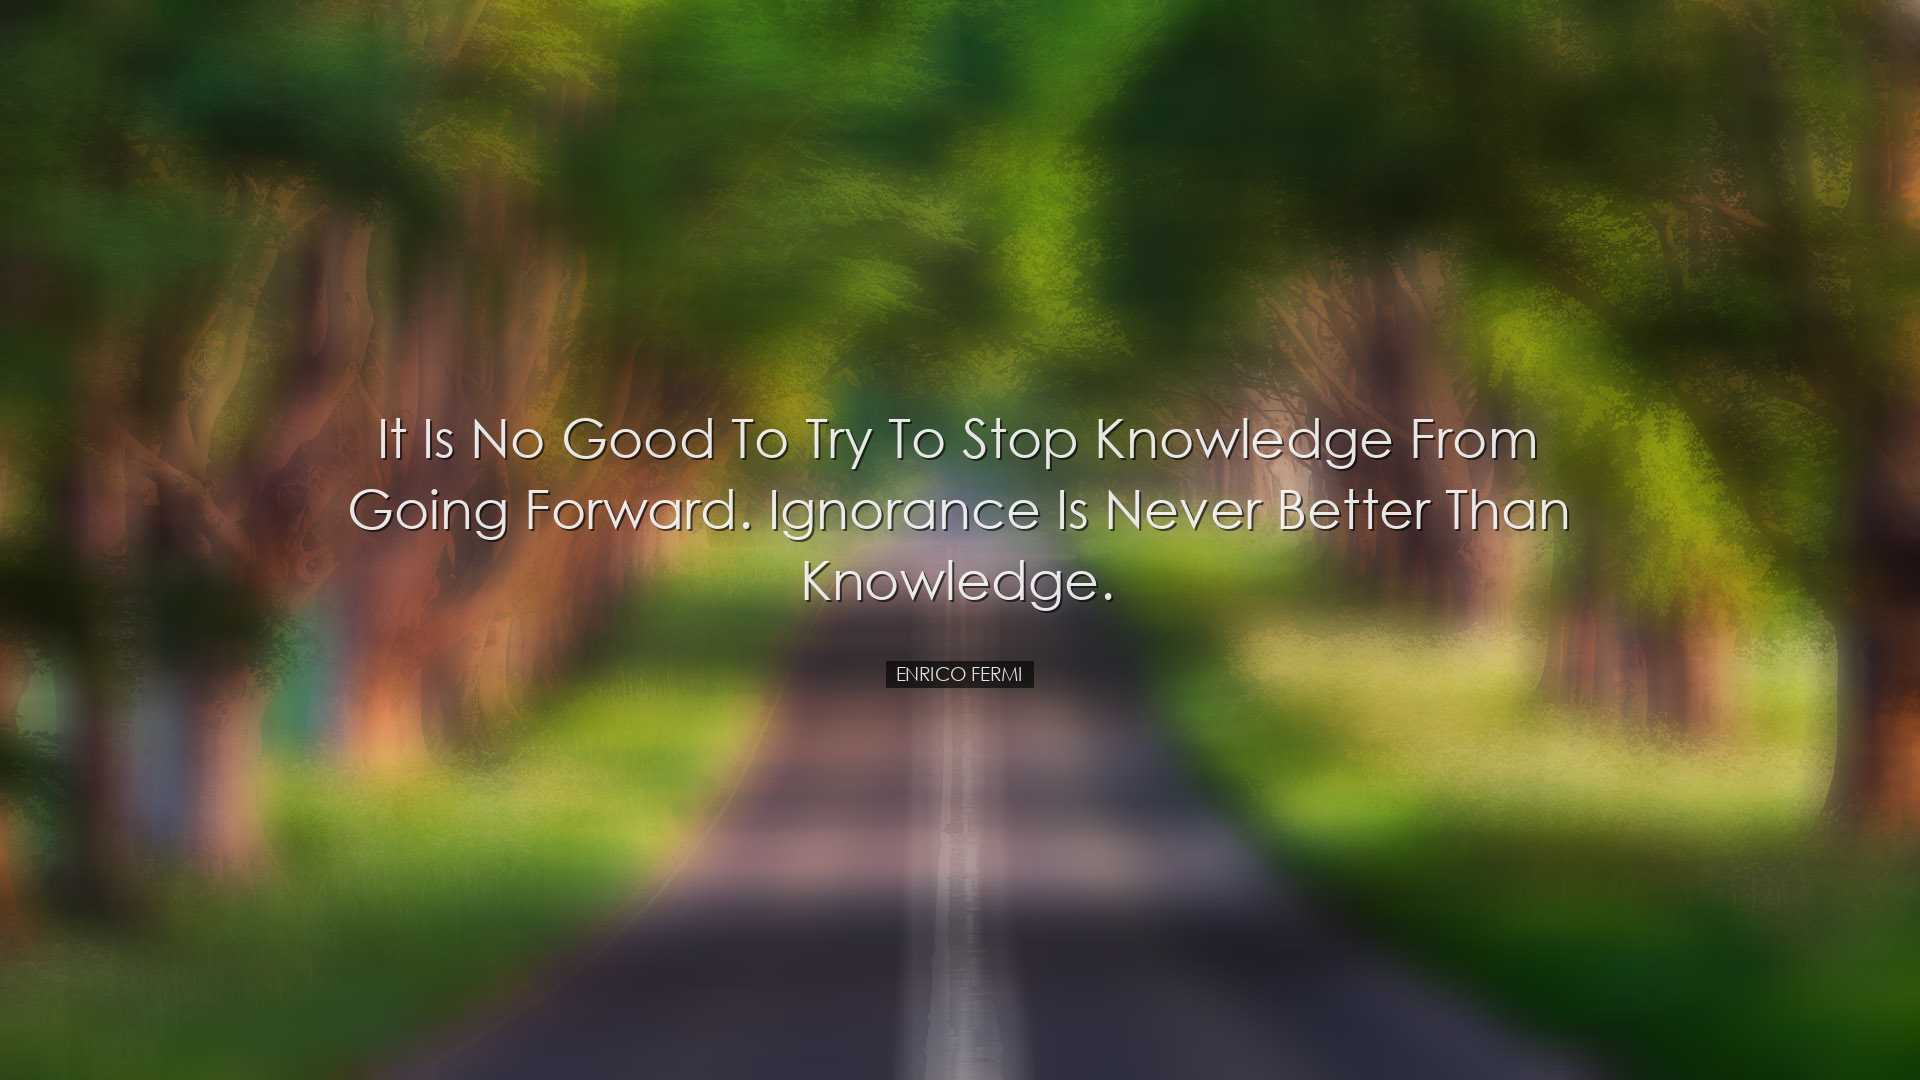 It is no good to try to stop knowledge from going forward. Ignoran